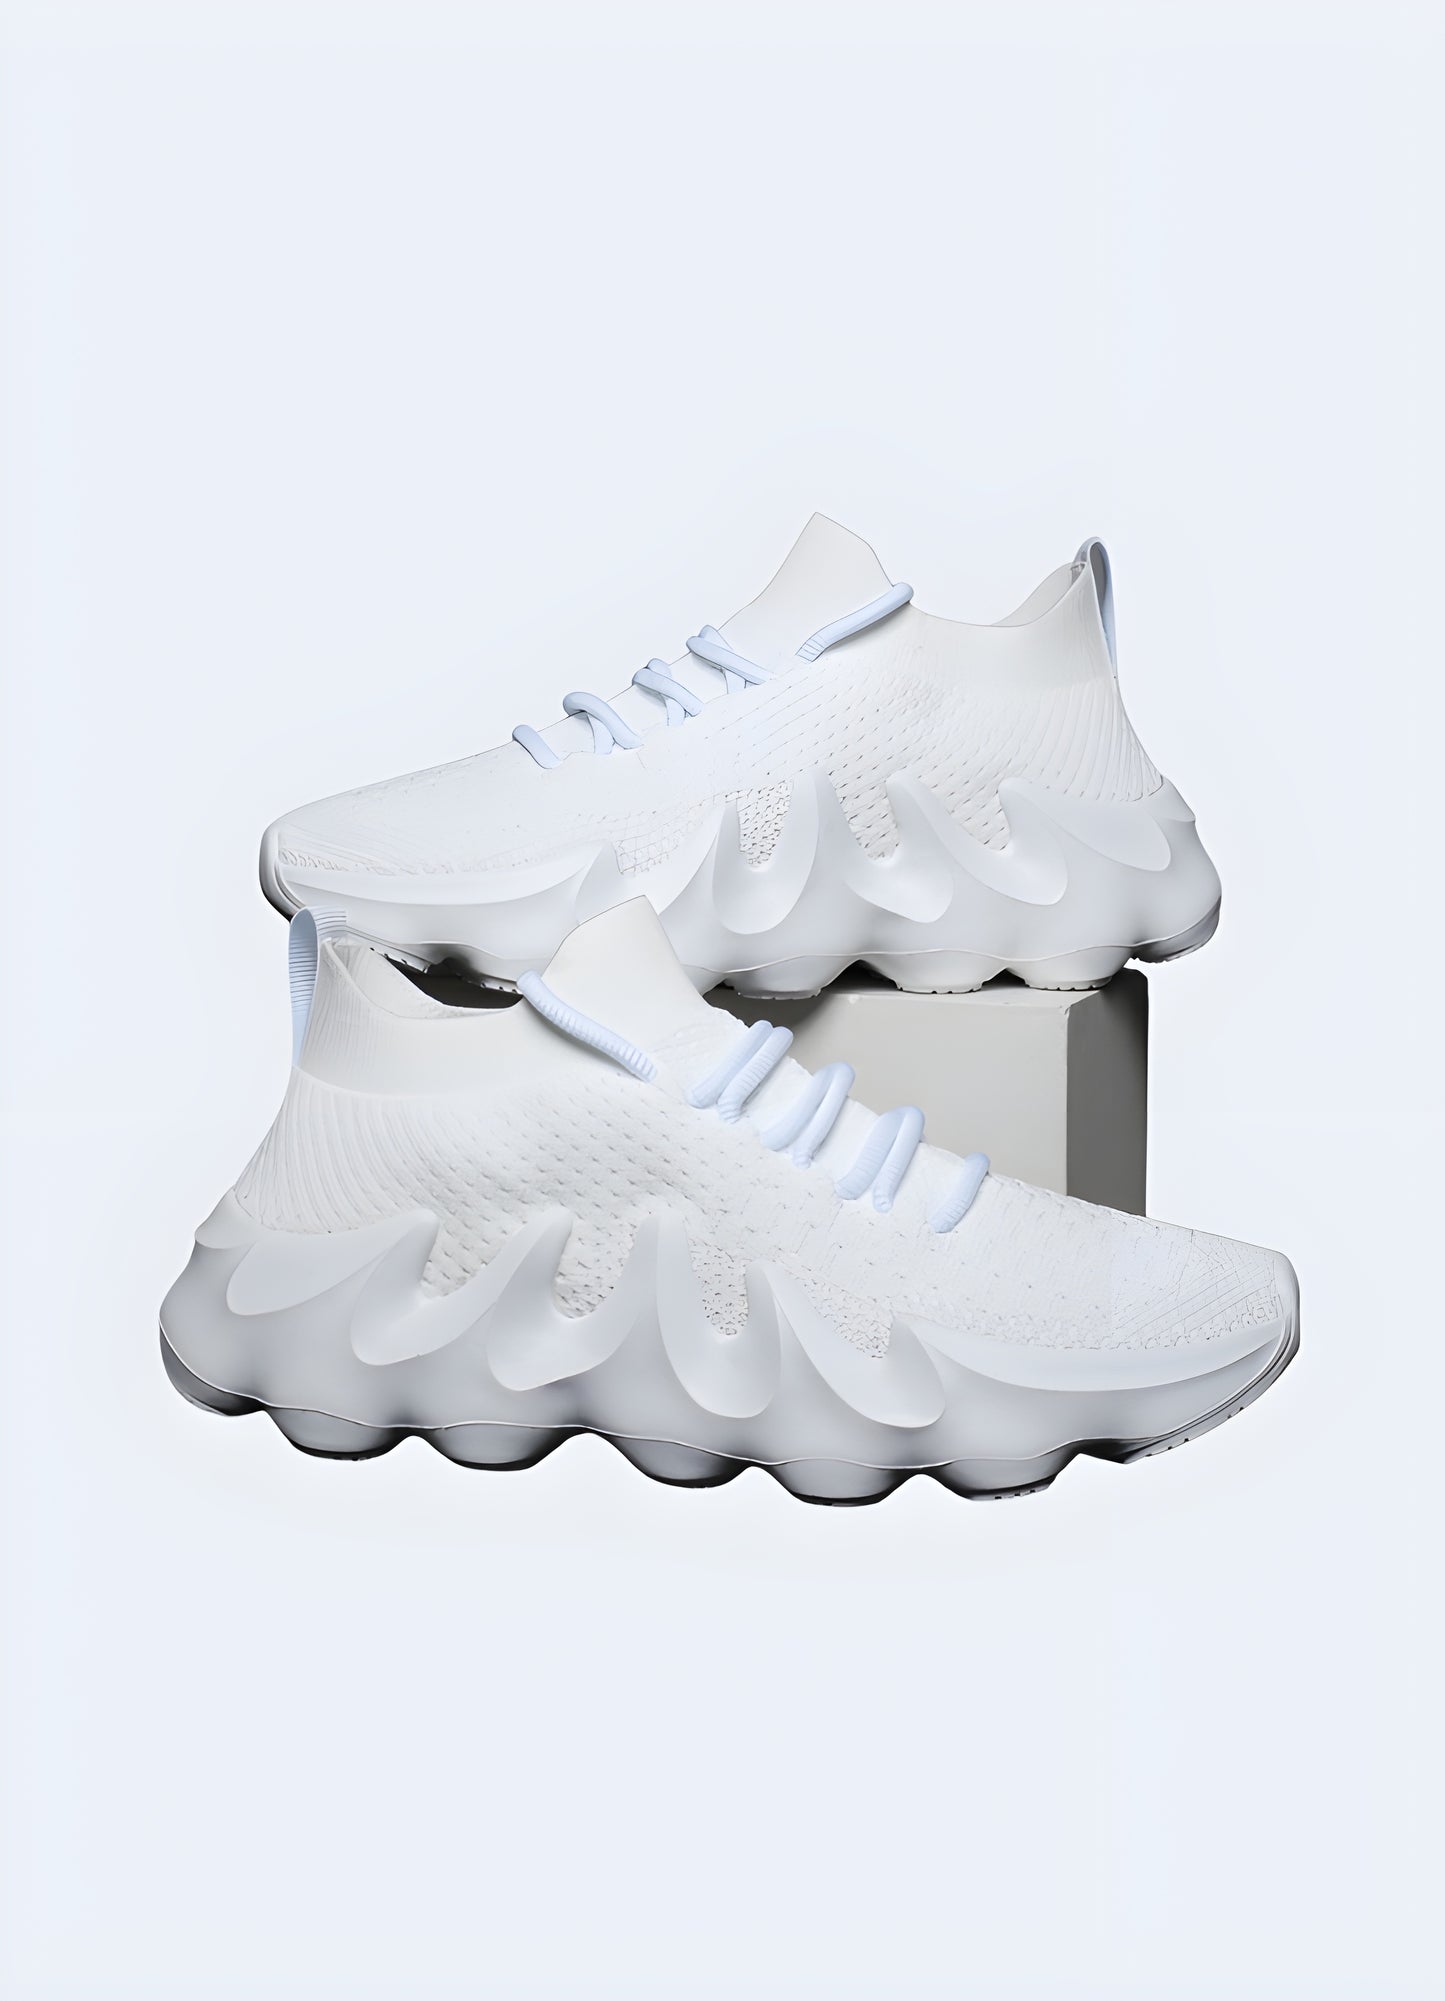 Quick access side zip closure lightweight knit, padded collar white techwear shoes.